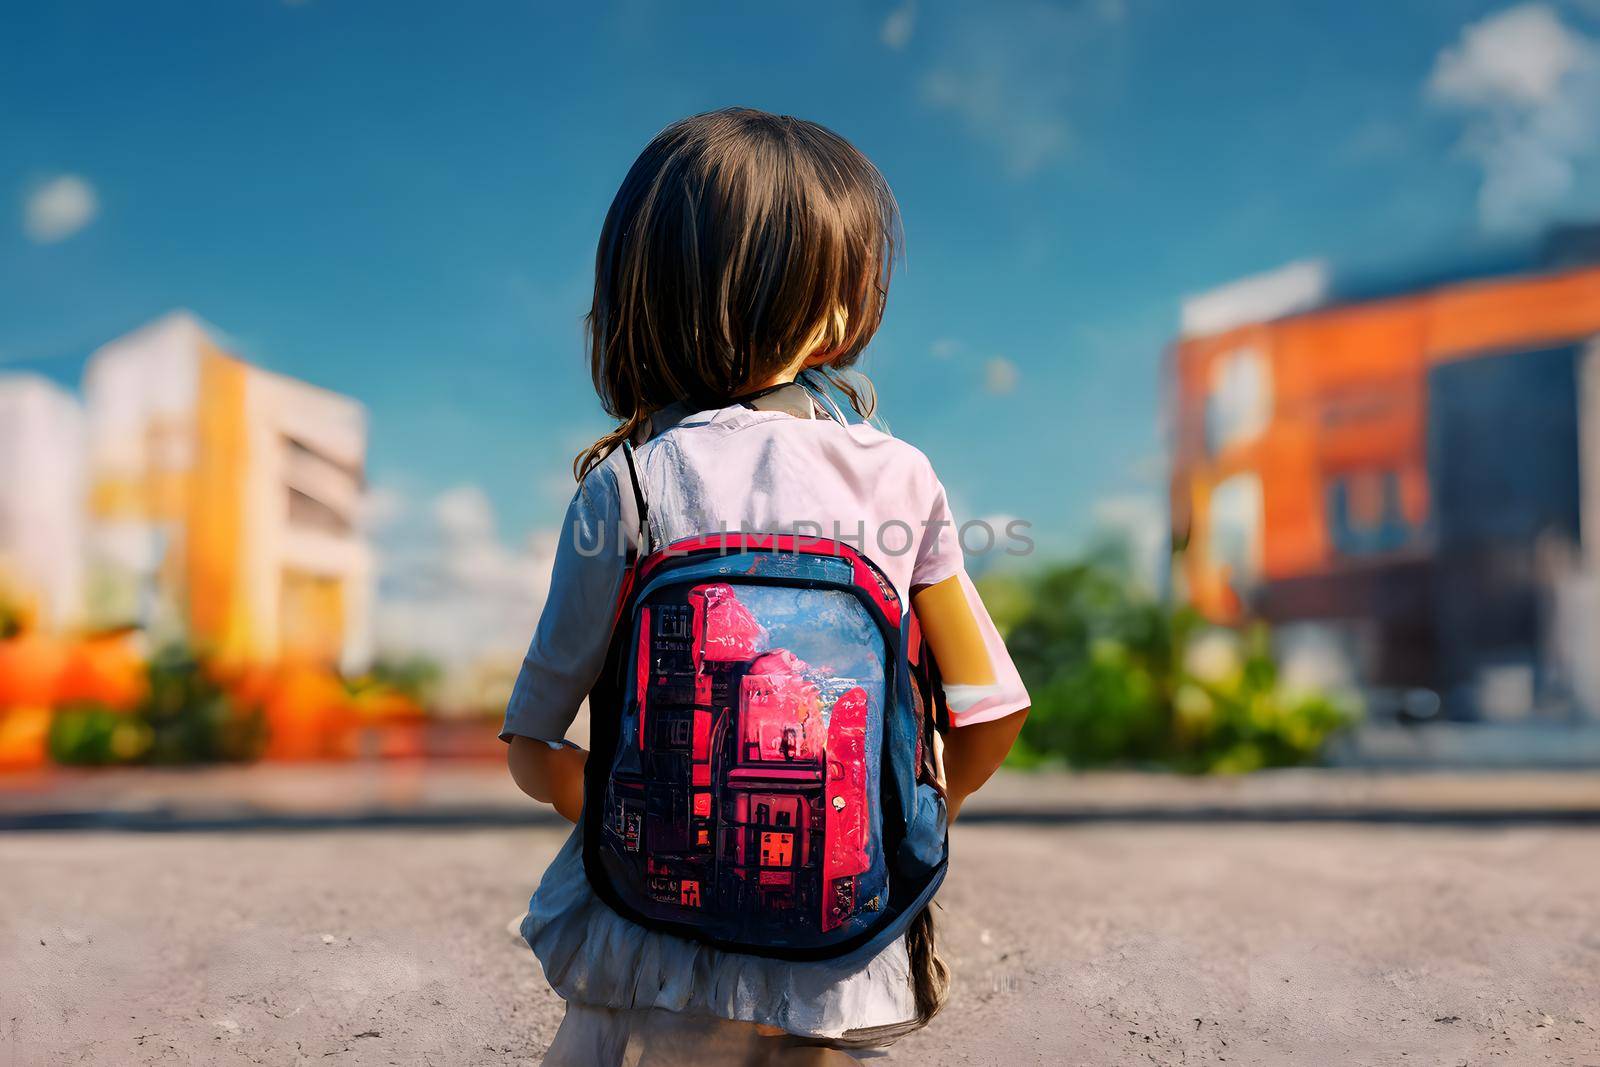 Back facing little girl with backpack looking at school building at sunny summer day, neural network generated art. Digitally generated image. Not based on any actual scene or pattern.